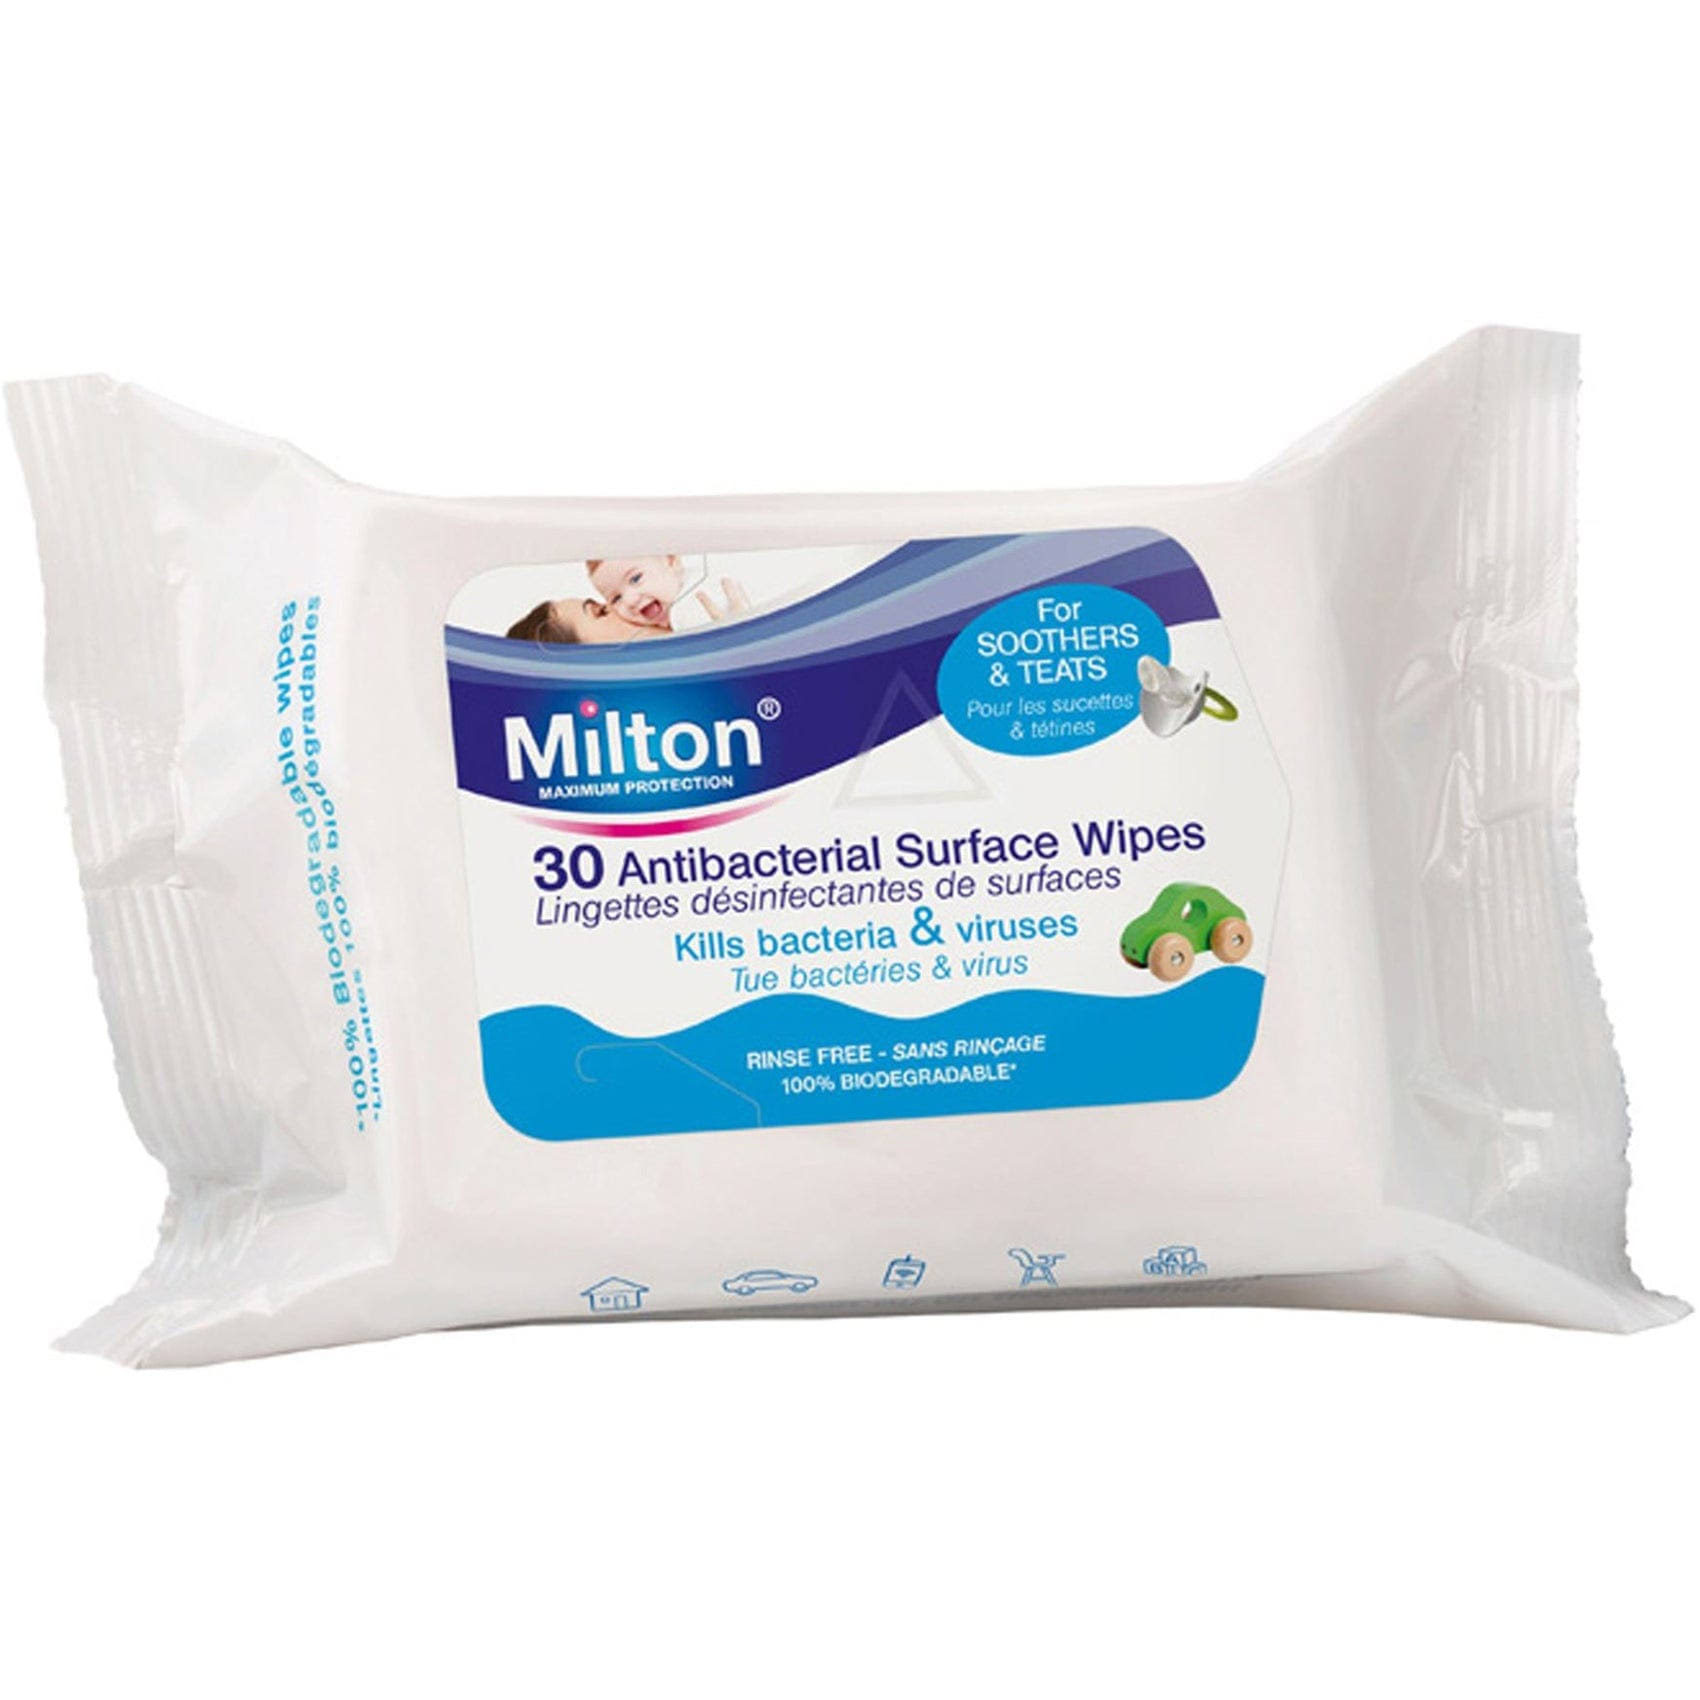 Milton Maximum Protection Antibacterial Surface Wipes - 30 Sheets